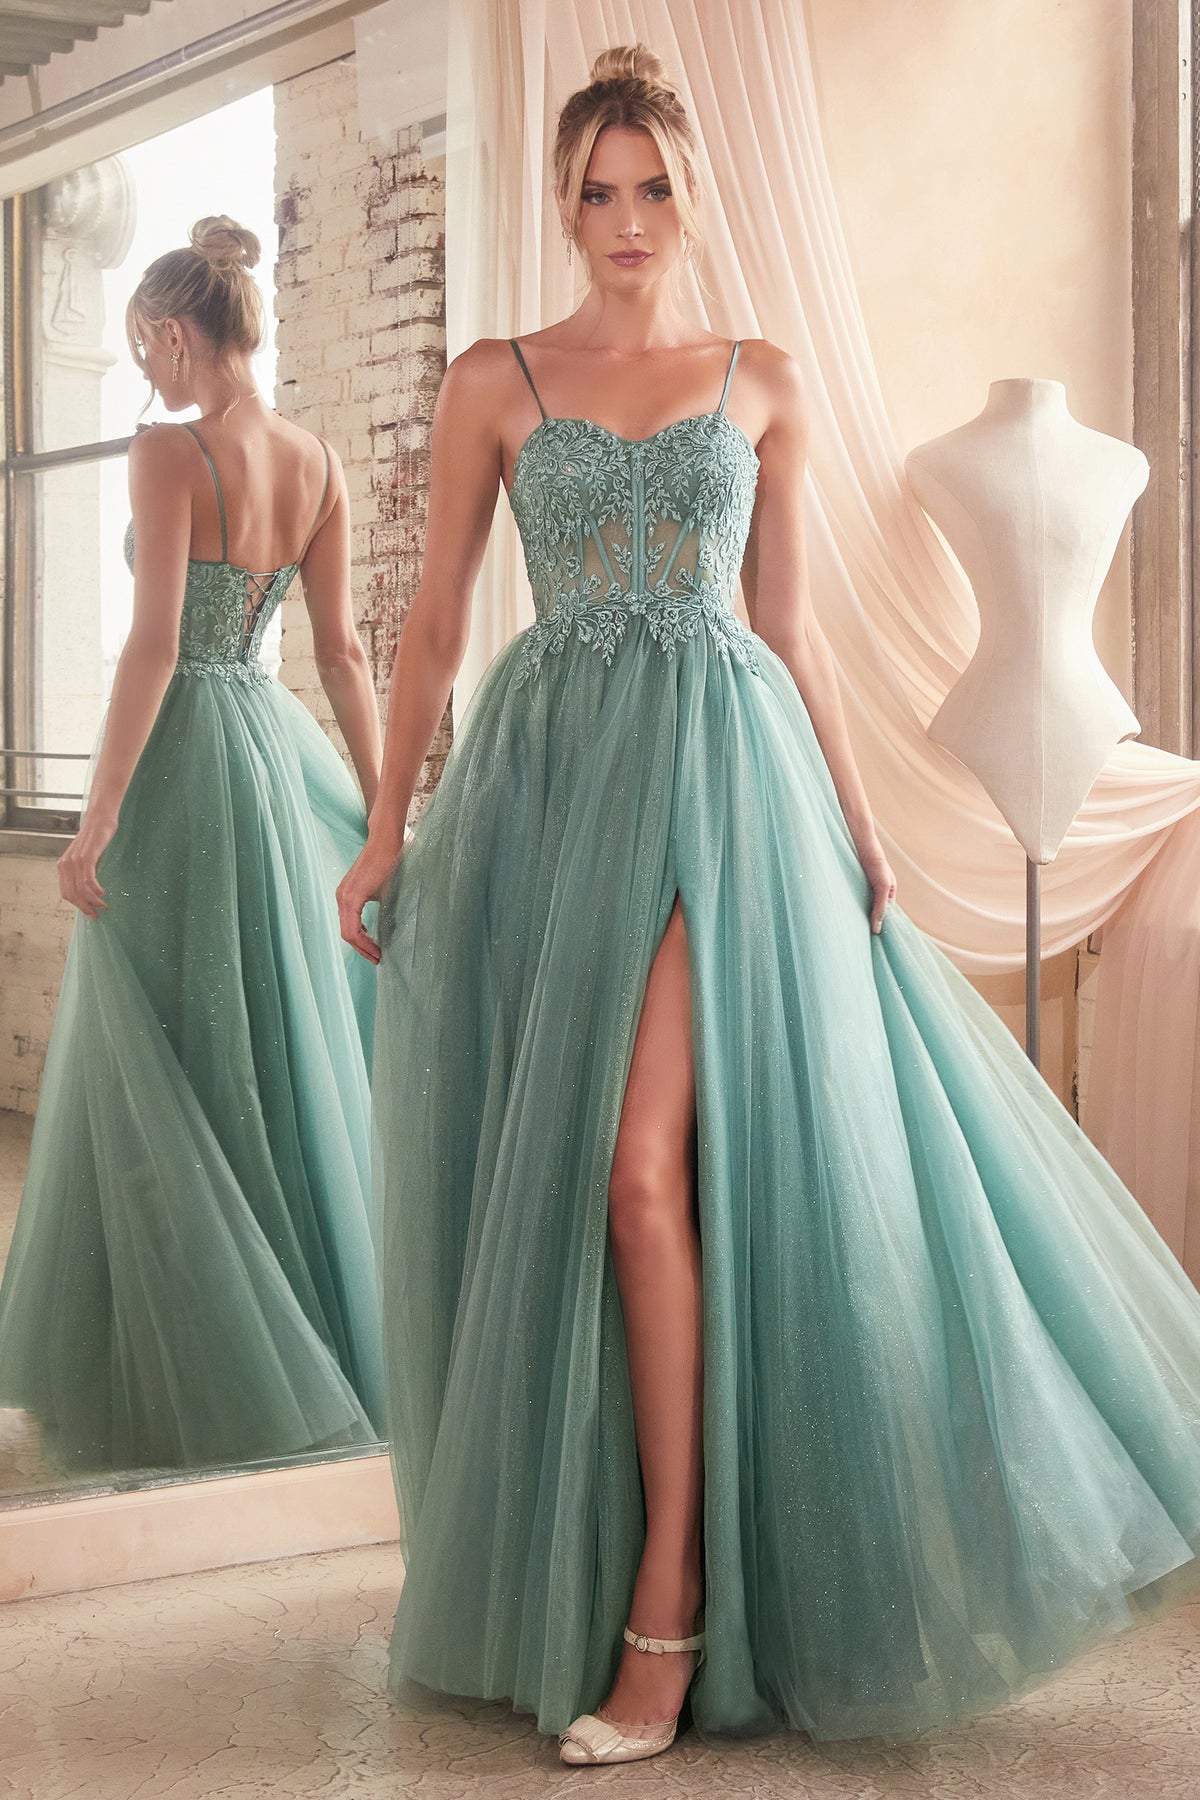 Tulle Dress Women, Tulle Tiered Dress, Tulle Prom Dress, Evening